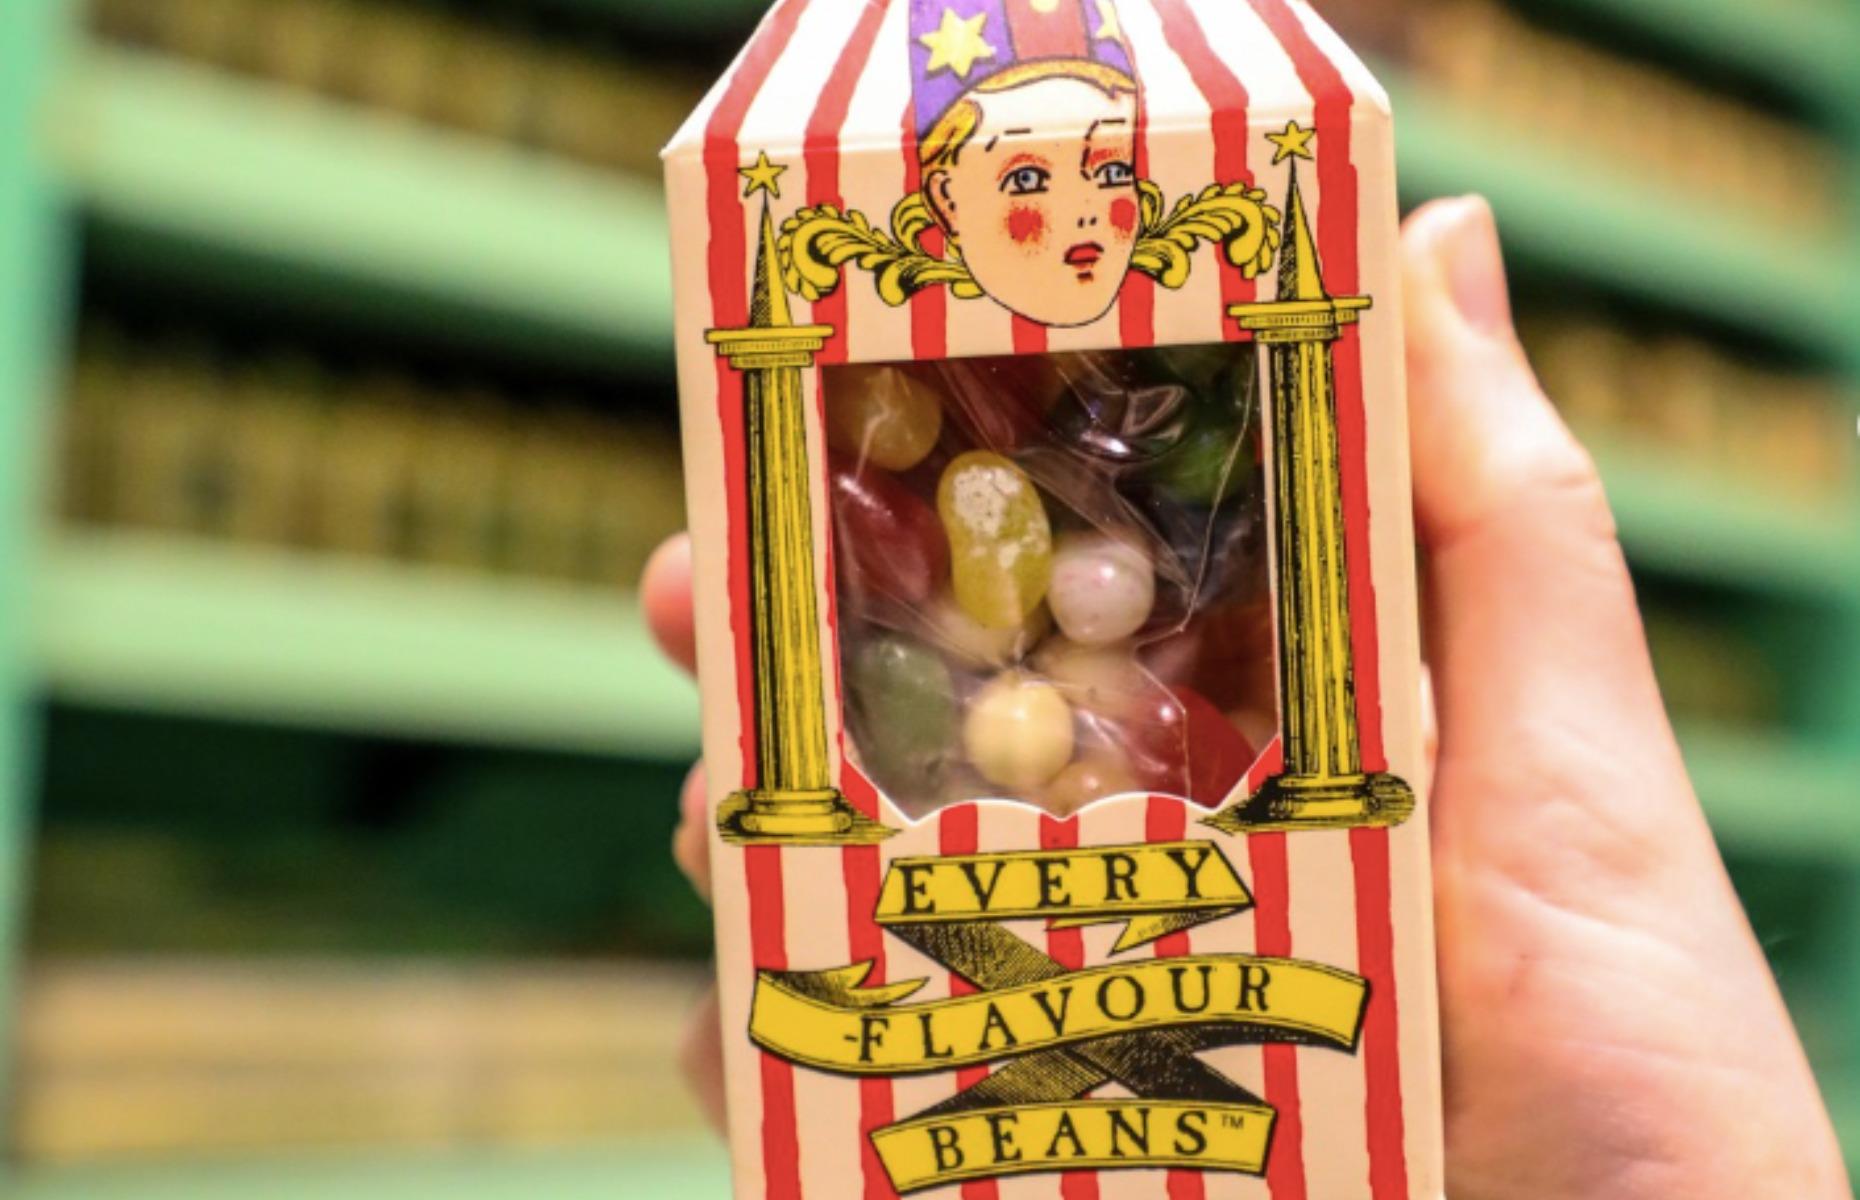 <p>If you've always fancied trying Bertie Bott’s Every Flavour Beans, the curious confectionery from the lunch trolley on board the Hogwarts Express, here’s your chance. With 20 flavors, from marshmallow and tutti-frutti to grass and earwax, you could end up with either a delicious –or disgusting – jellybean bite. Available at the Warner Bros. Studio Tour London, they're perfect for keeping kids entertained, too.</p>